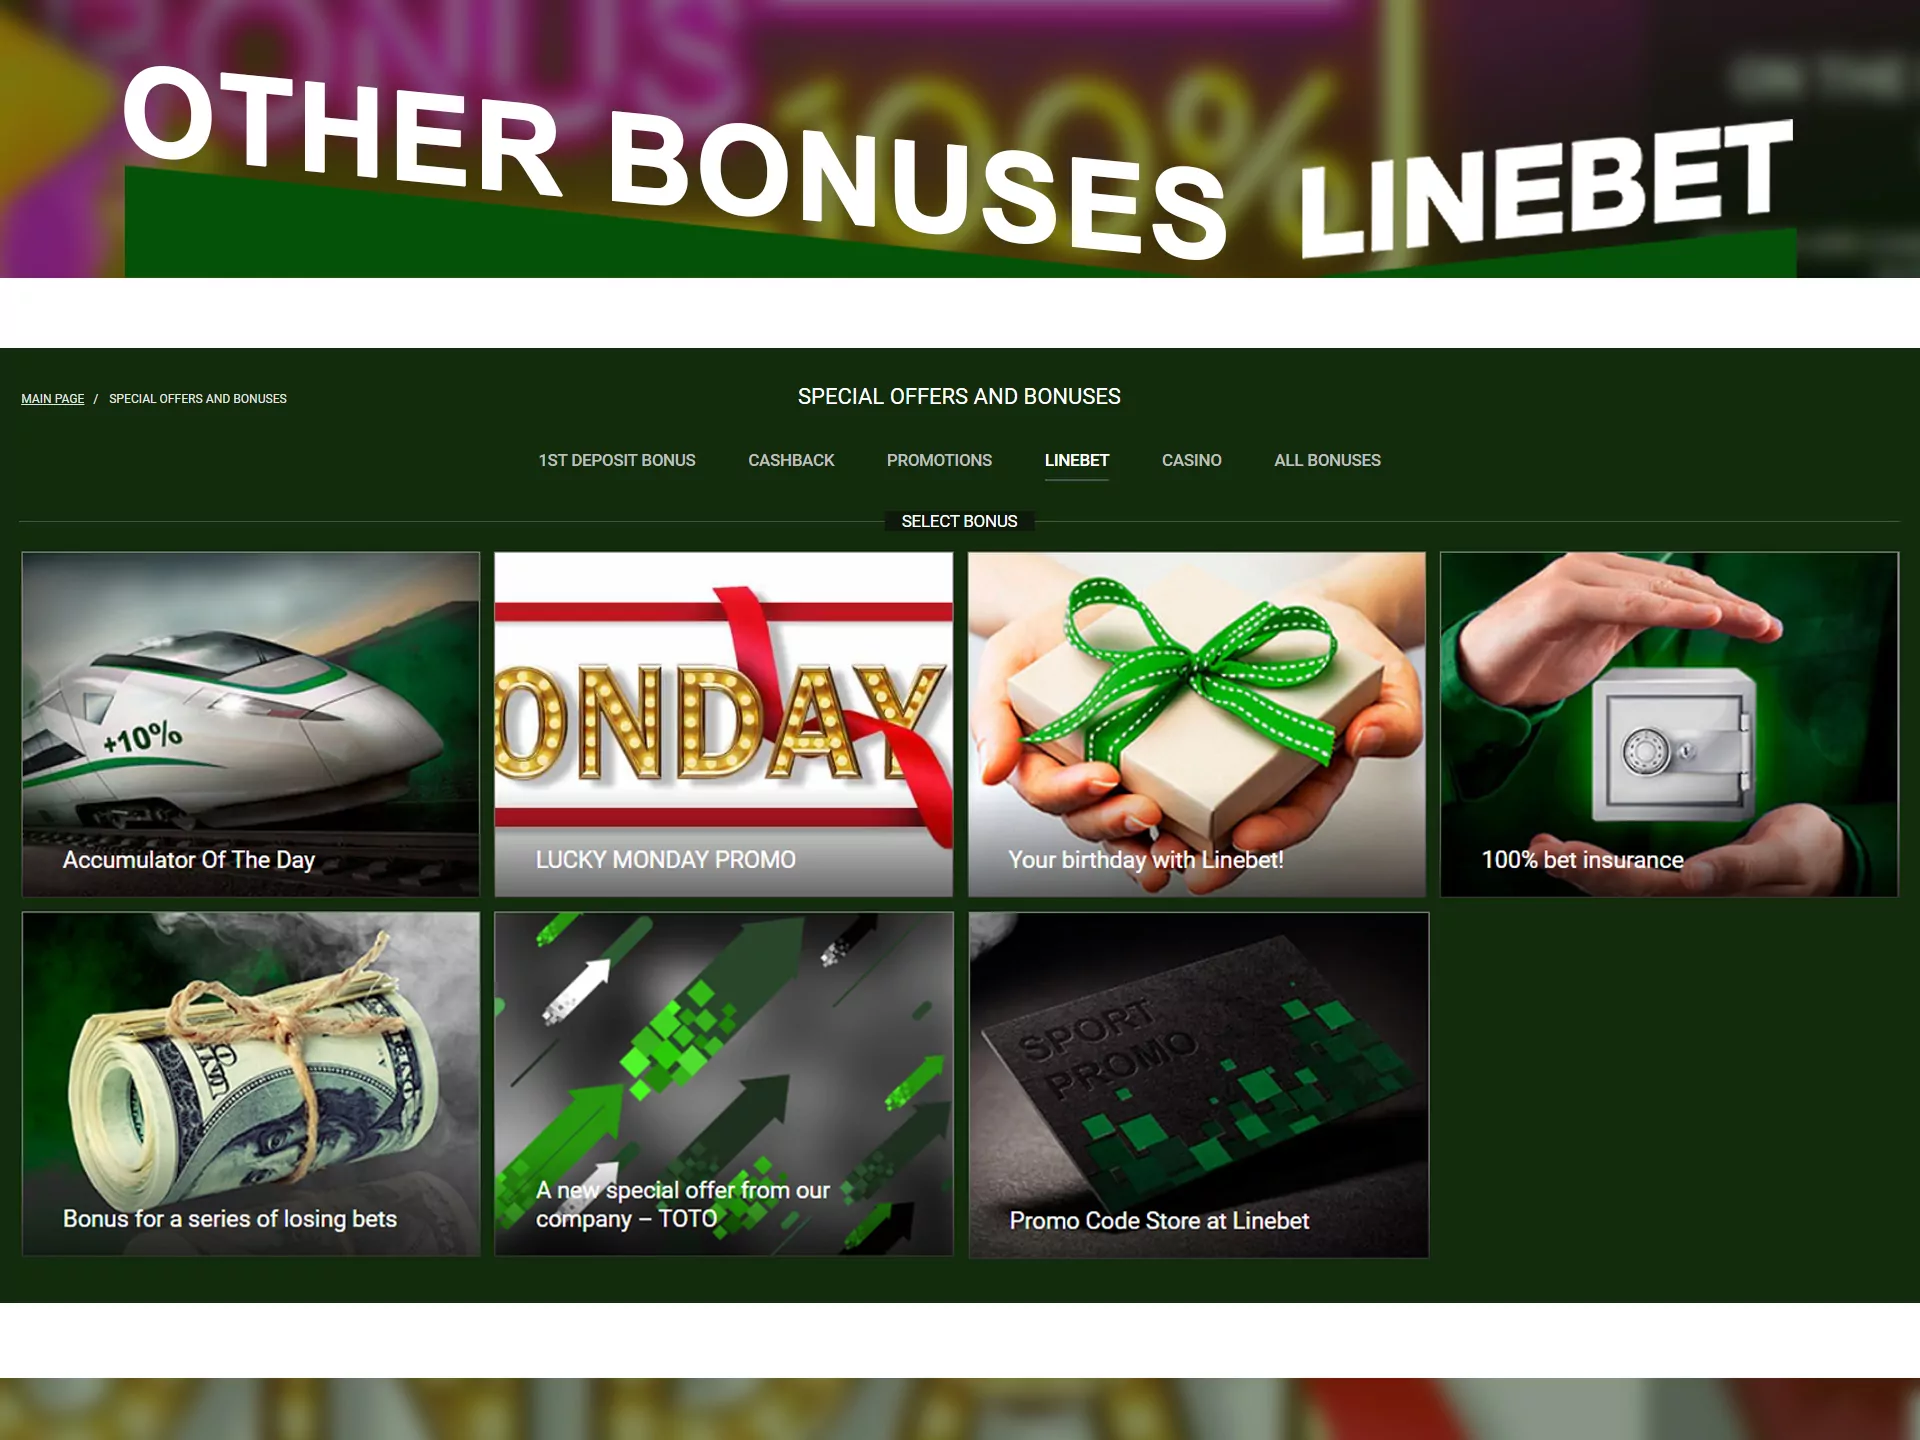 Linebet provides new and regular players with lots of bonuses and promotions.